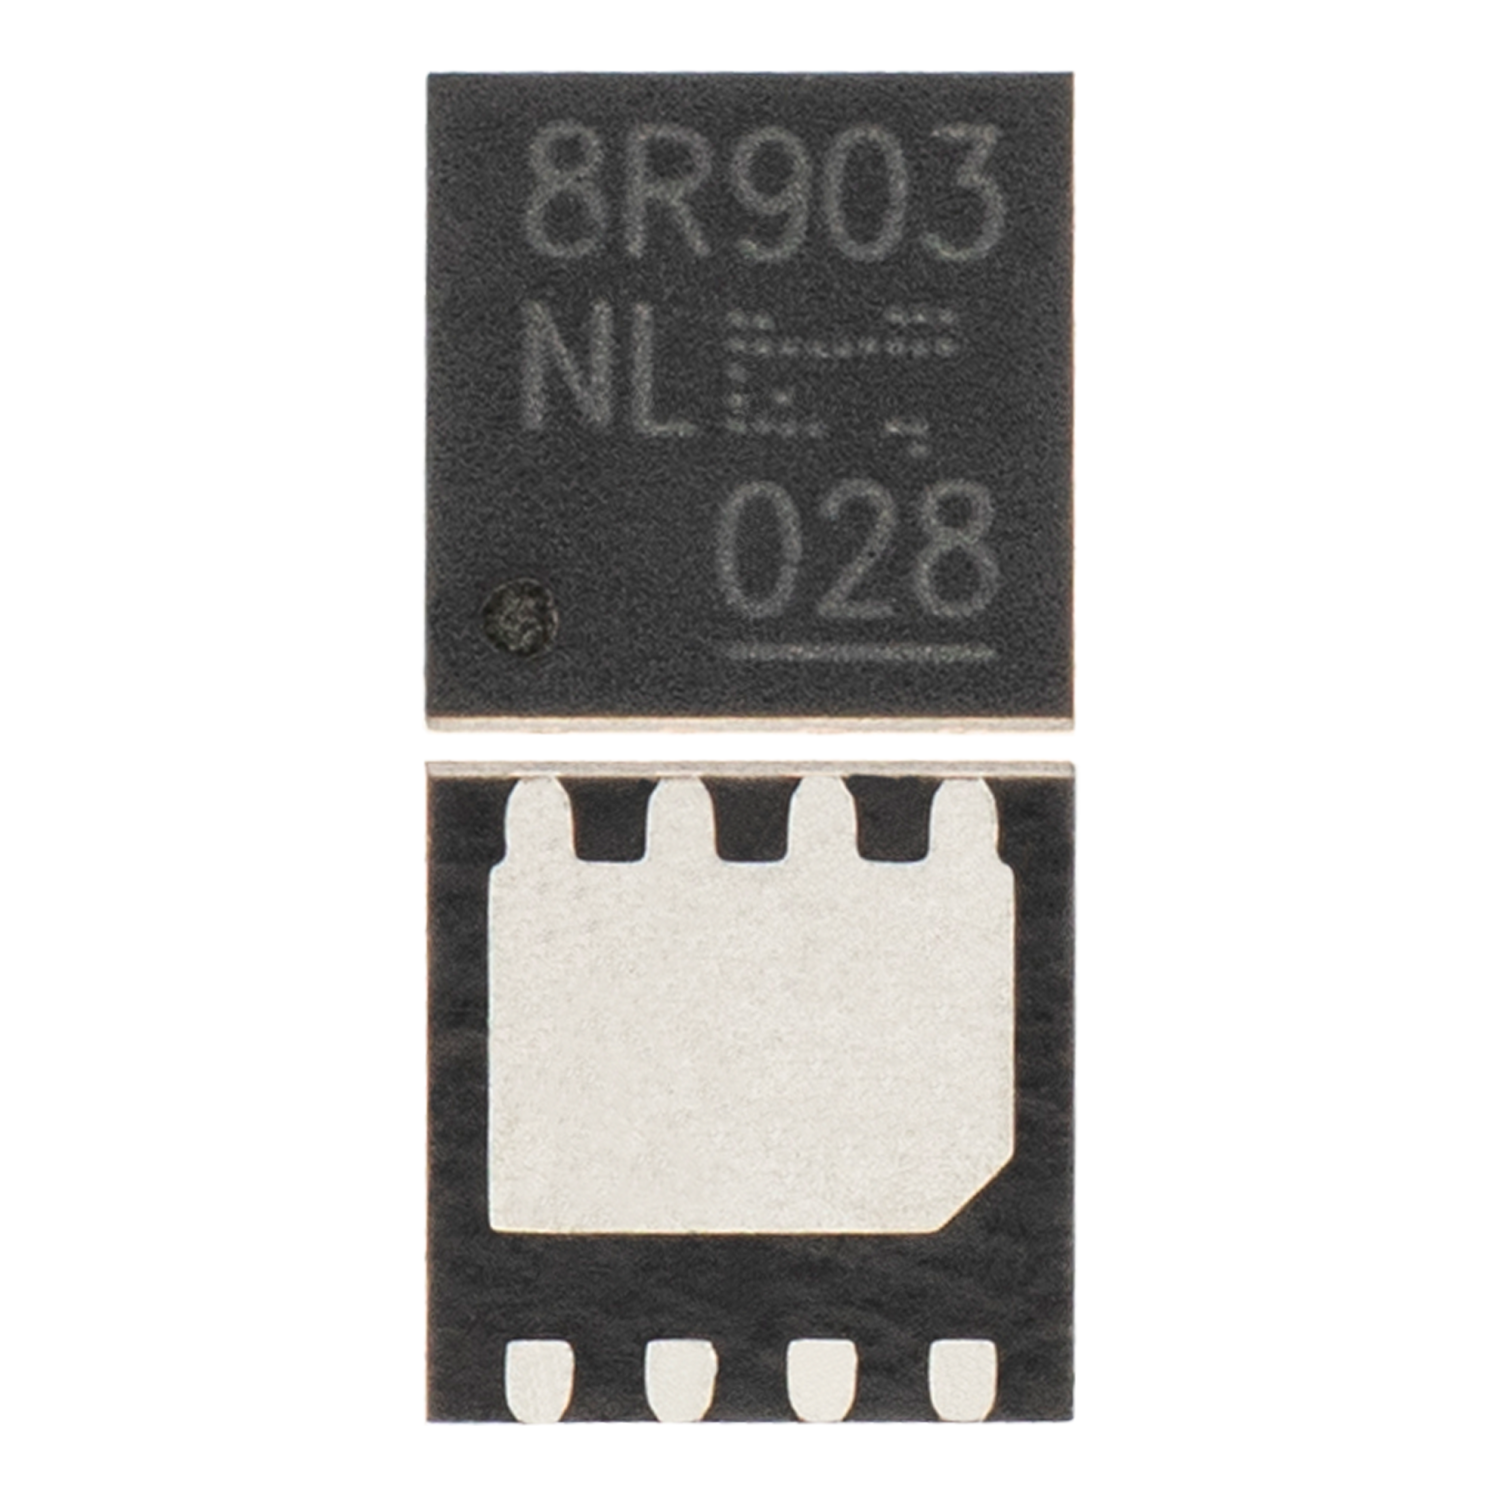 Replacement Power MOSFET IC Compatible With Xbox One S / Xbox One X (N-Ch 4C50 / RK31 / TPN8R903NL / RH38) (MOSFET# 1 or #2) (10 Pack)